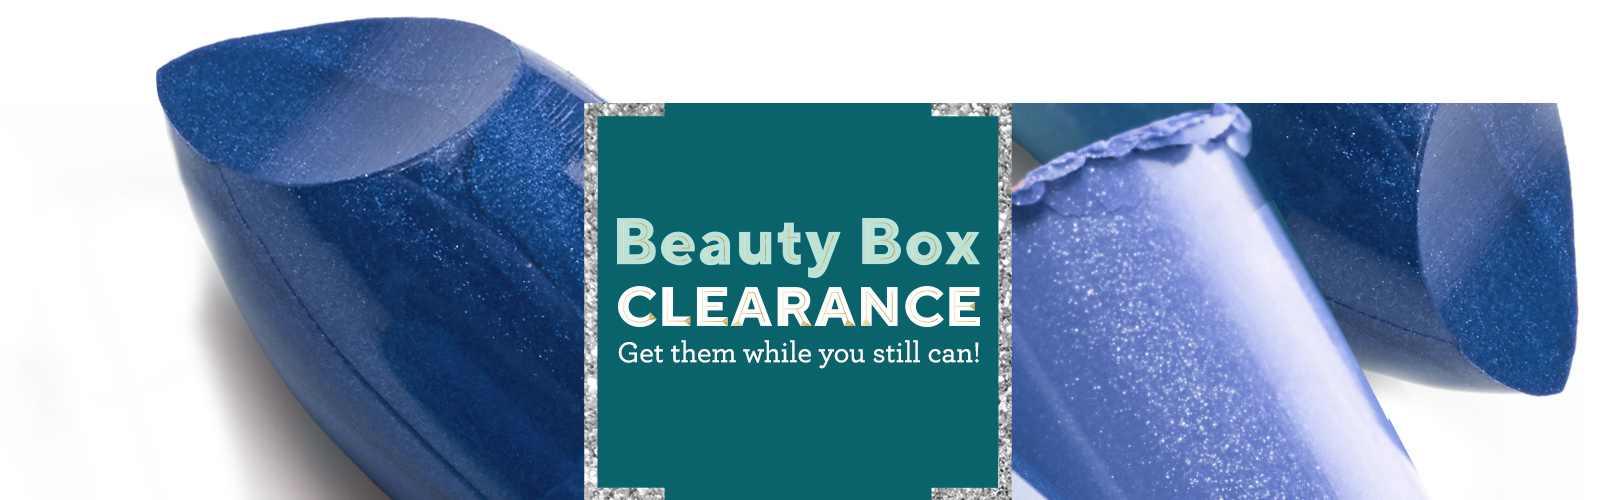 Beauty Box Clearance  Get them while you still can!